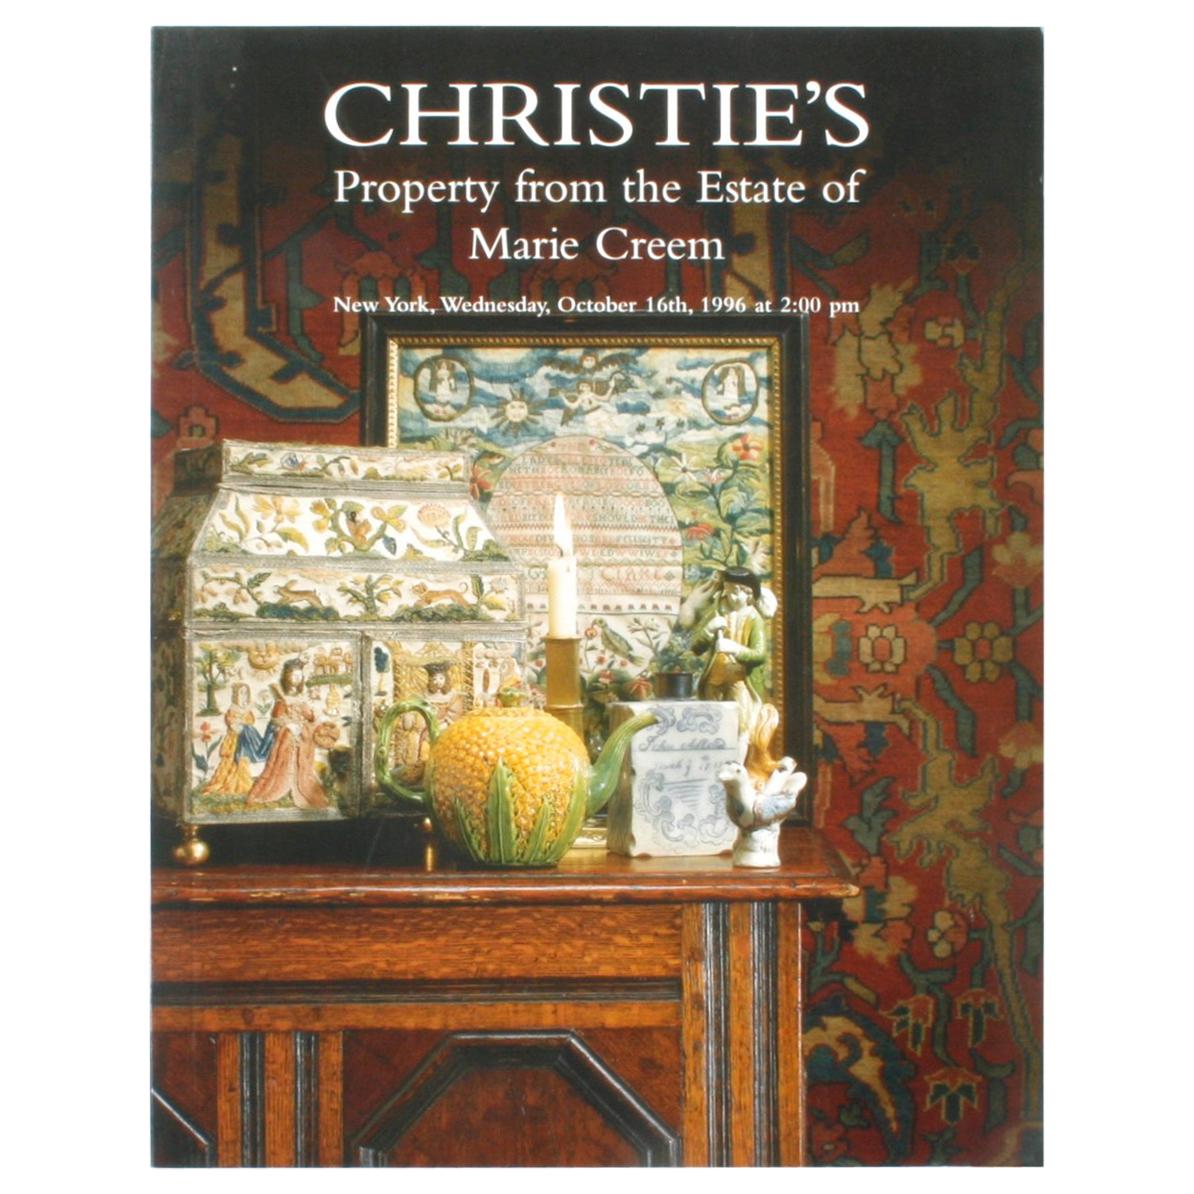 Christie's: Property from the Estate of Marie Creem, October 1996